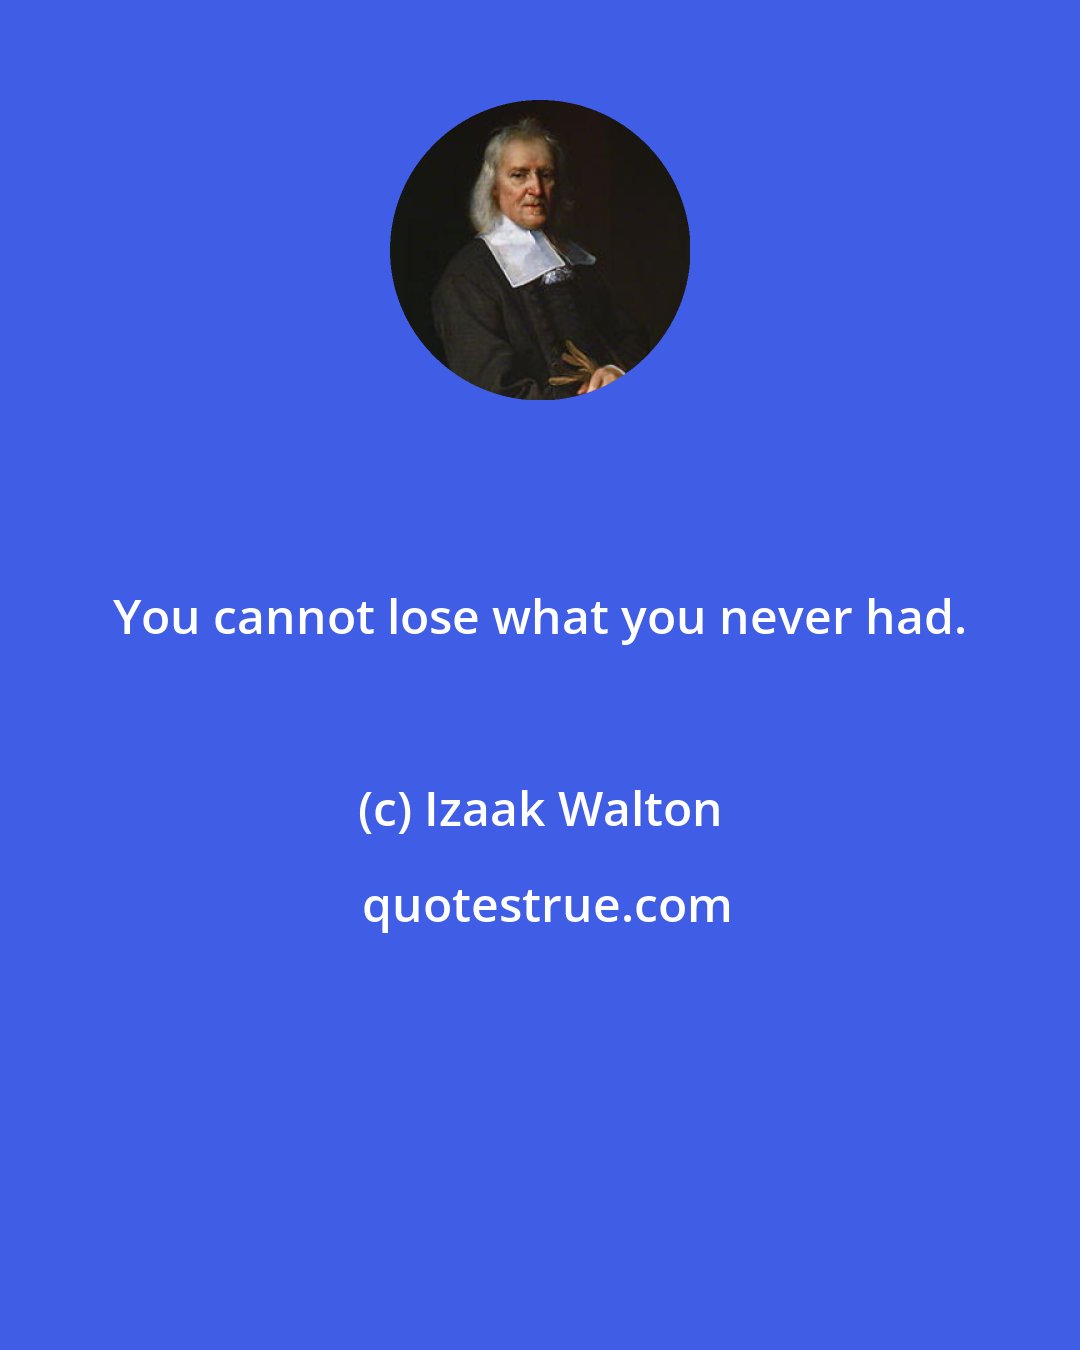 Izaak Walton: You cannot lose what you never had.